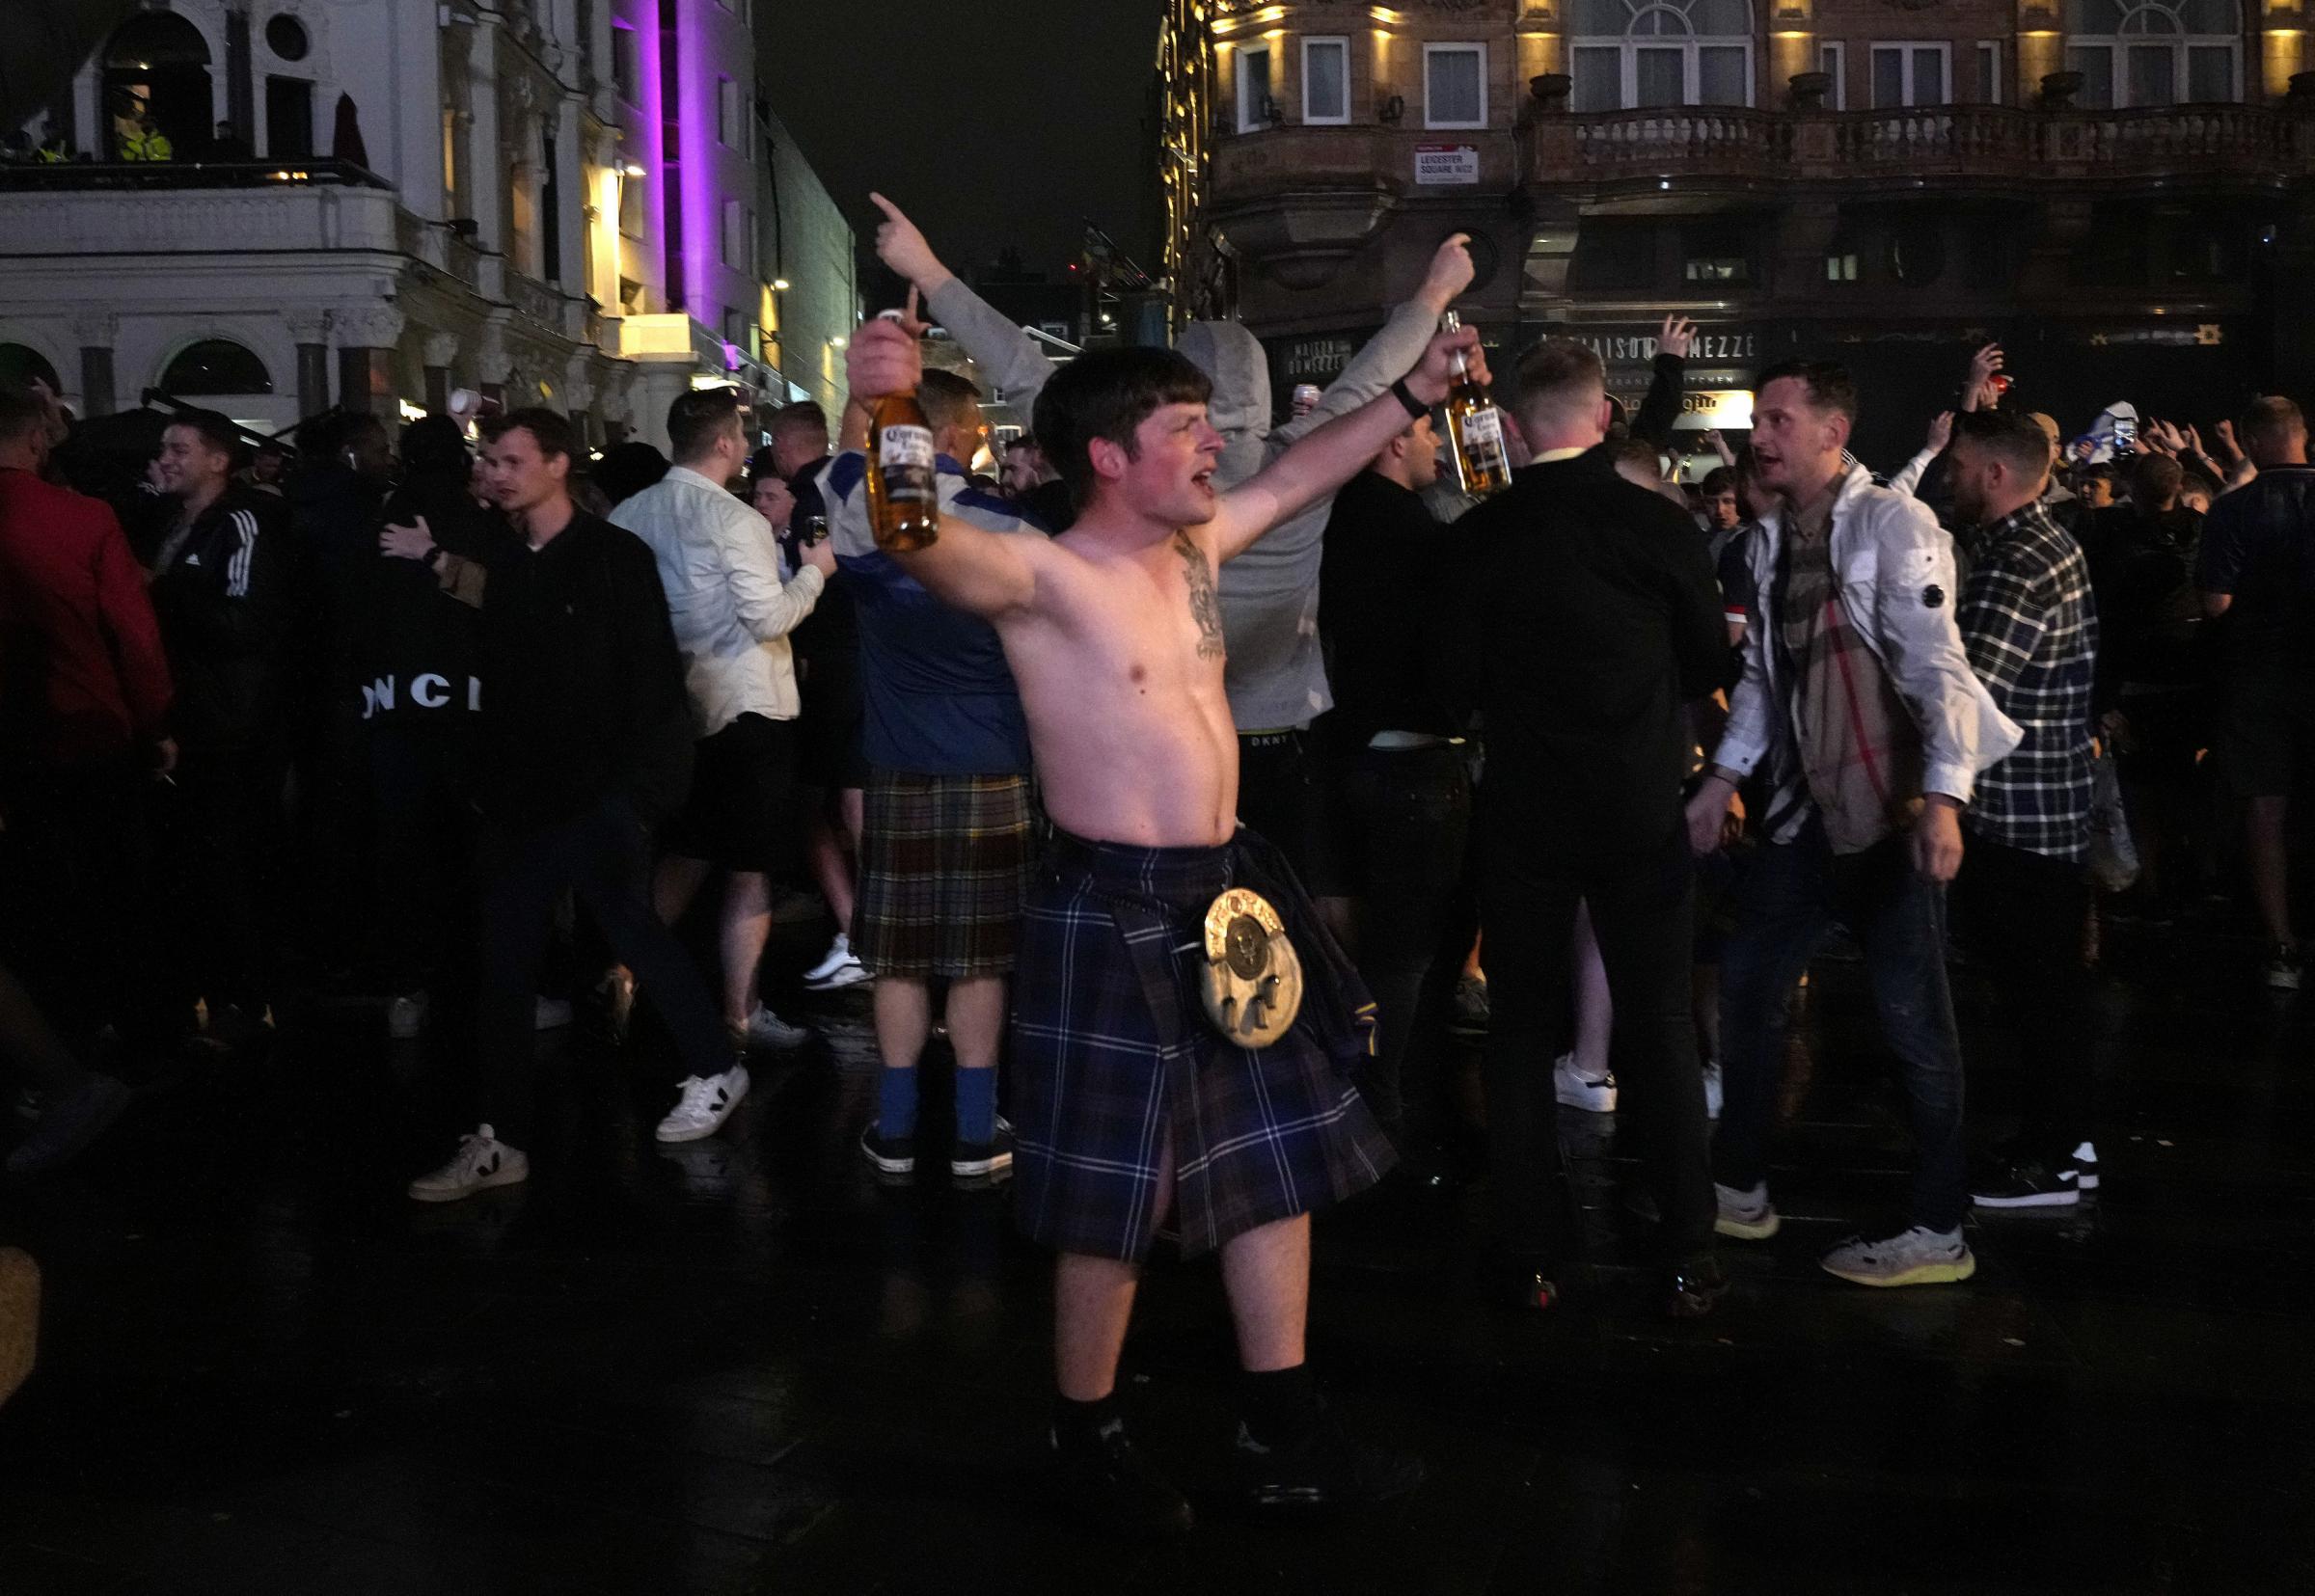 A Scotland supporter reacts in Leicester Square in London, Friday, June 18, 2021 after the Euro 2020 soccer championship group D match between England and Scotland at Wembley Stadium. The match ended in a 0-0 draw. (AP Photo/Kirsty Wigglesworth).